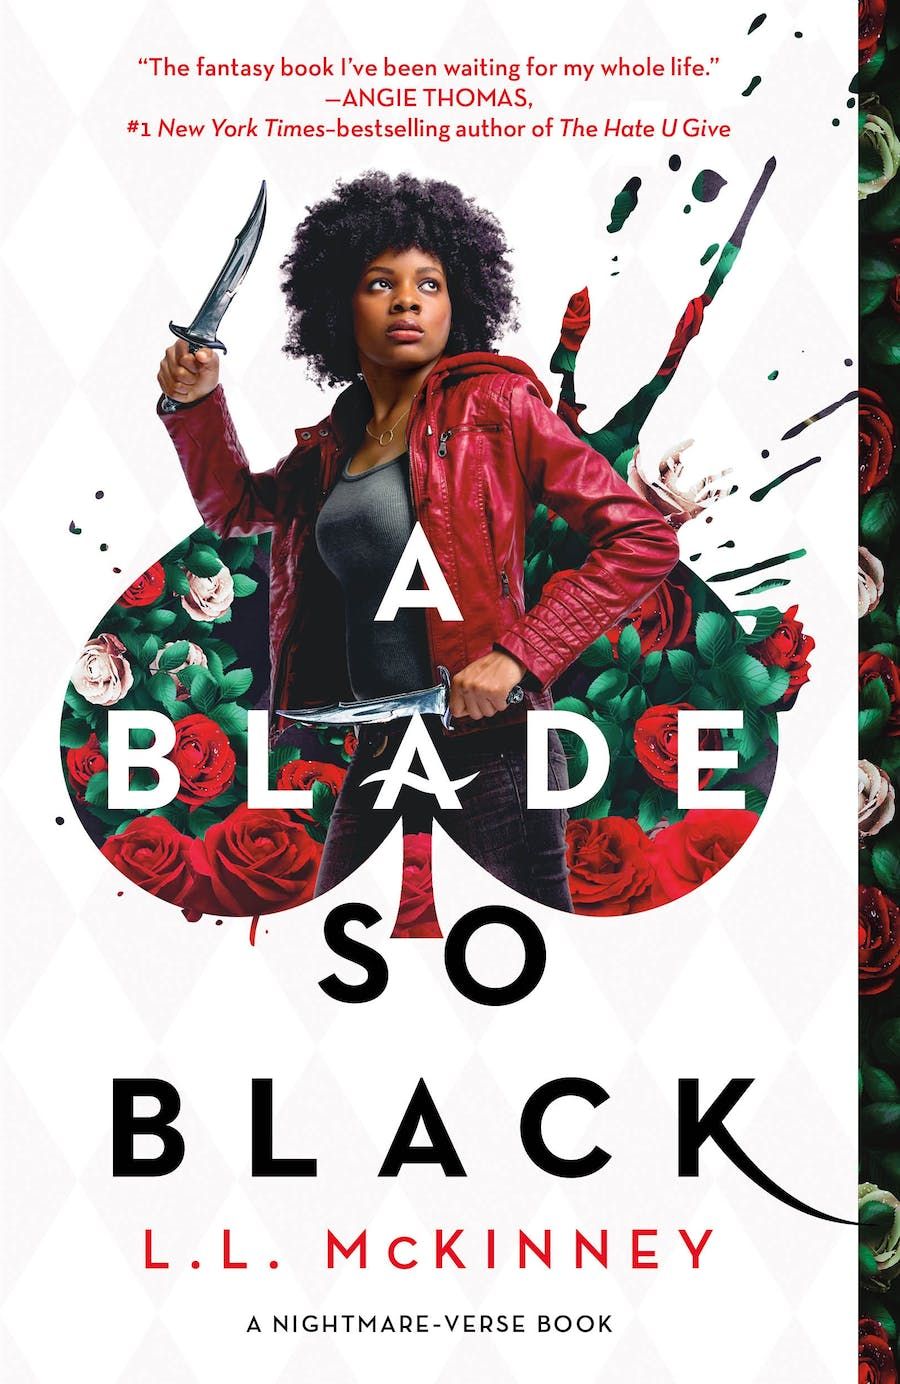 Book cover of A Blade So Black by L.L. McKinney